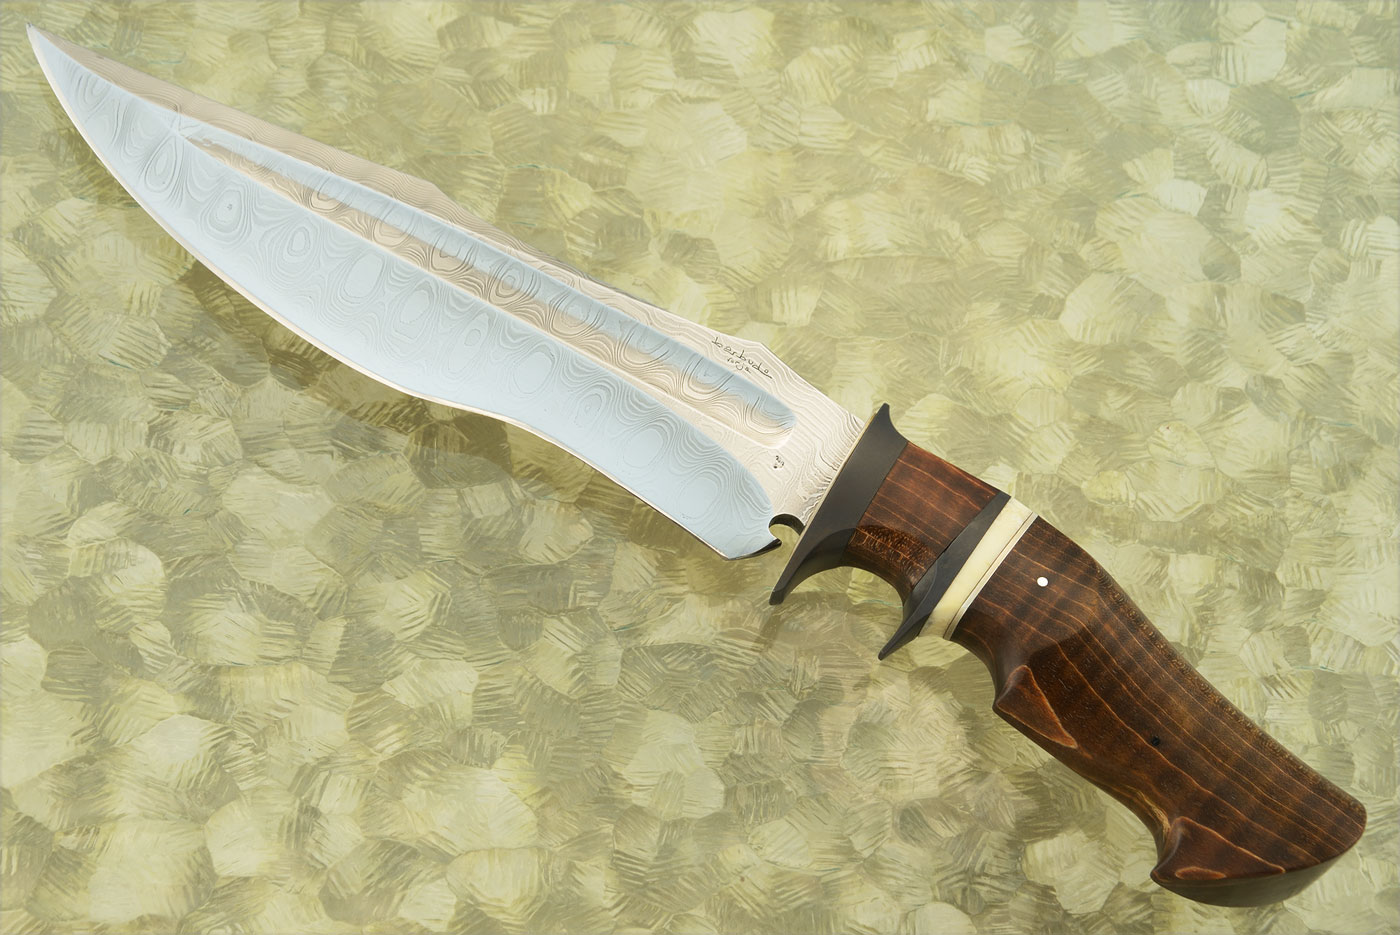 Leon Damascus Sub-Hilt Fighter with Tiger Maple, Walrus Ivory, and Titanium